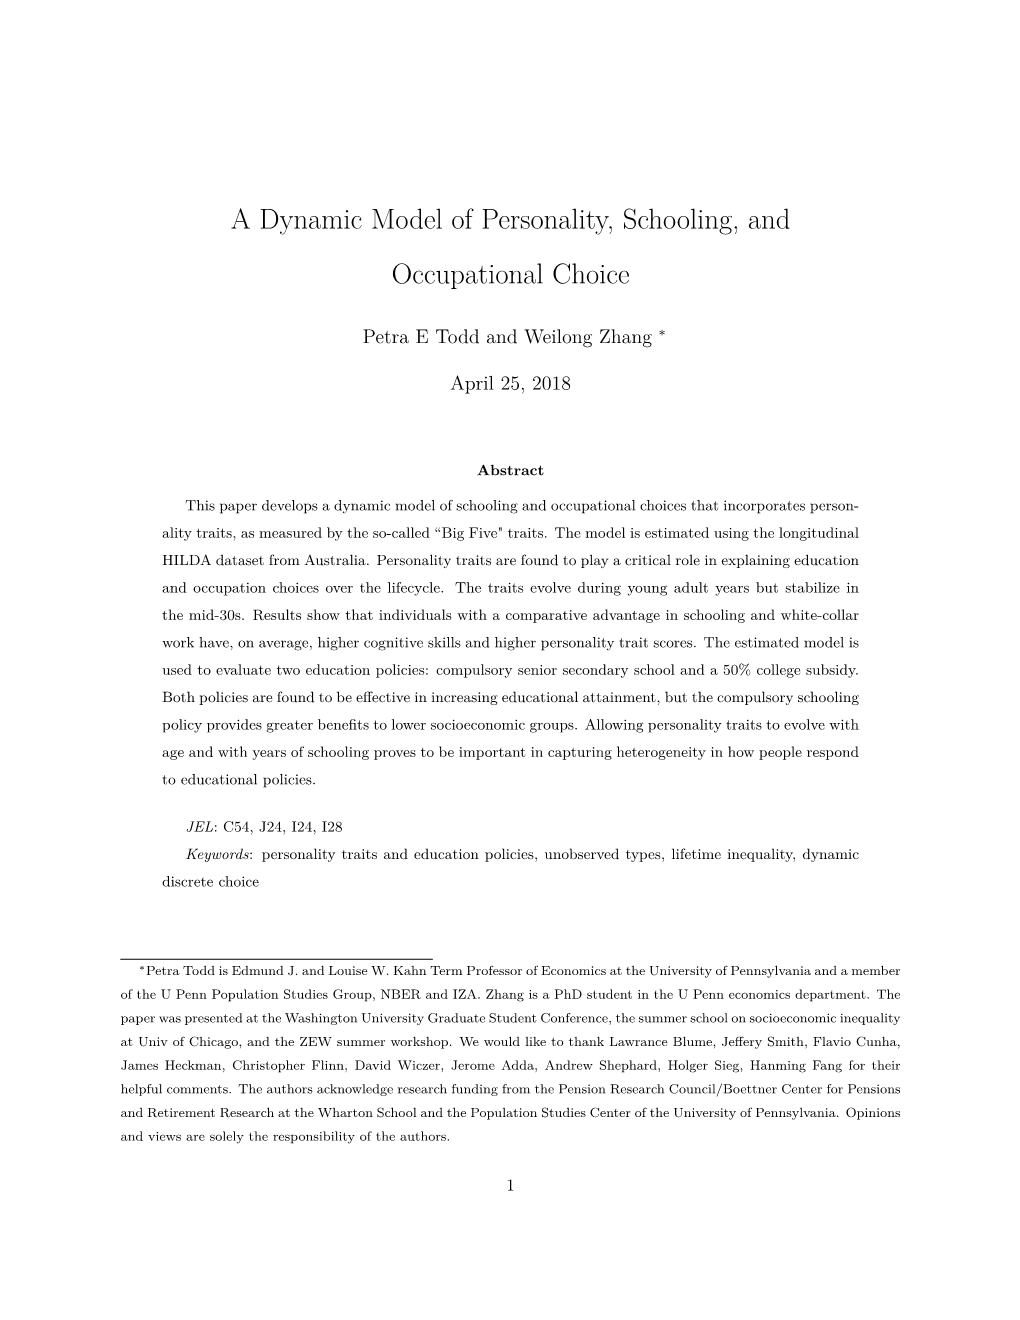 A Dynamic Model of Personality, Schooling, and Occupational Choice